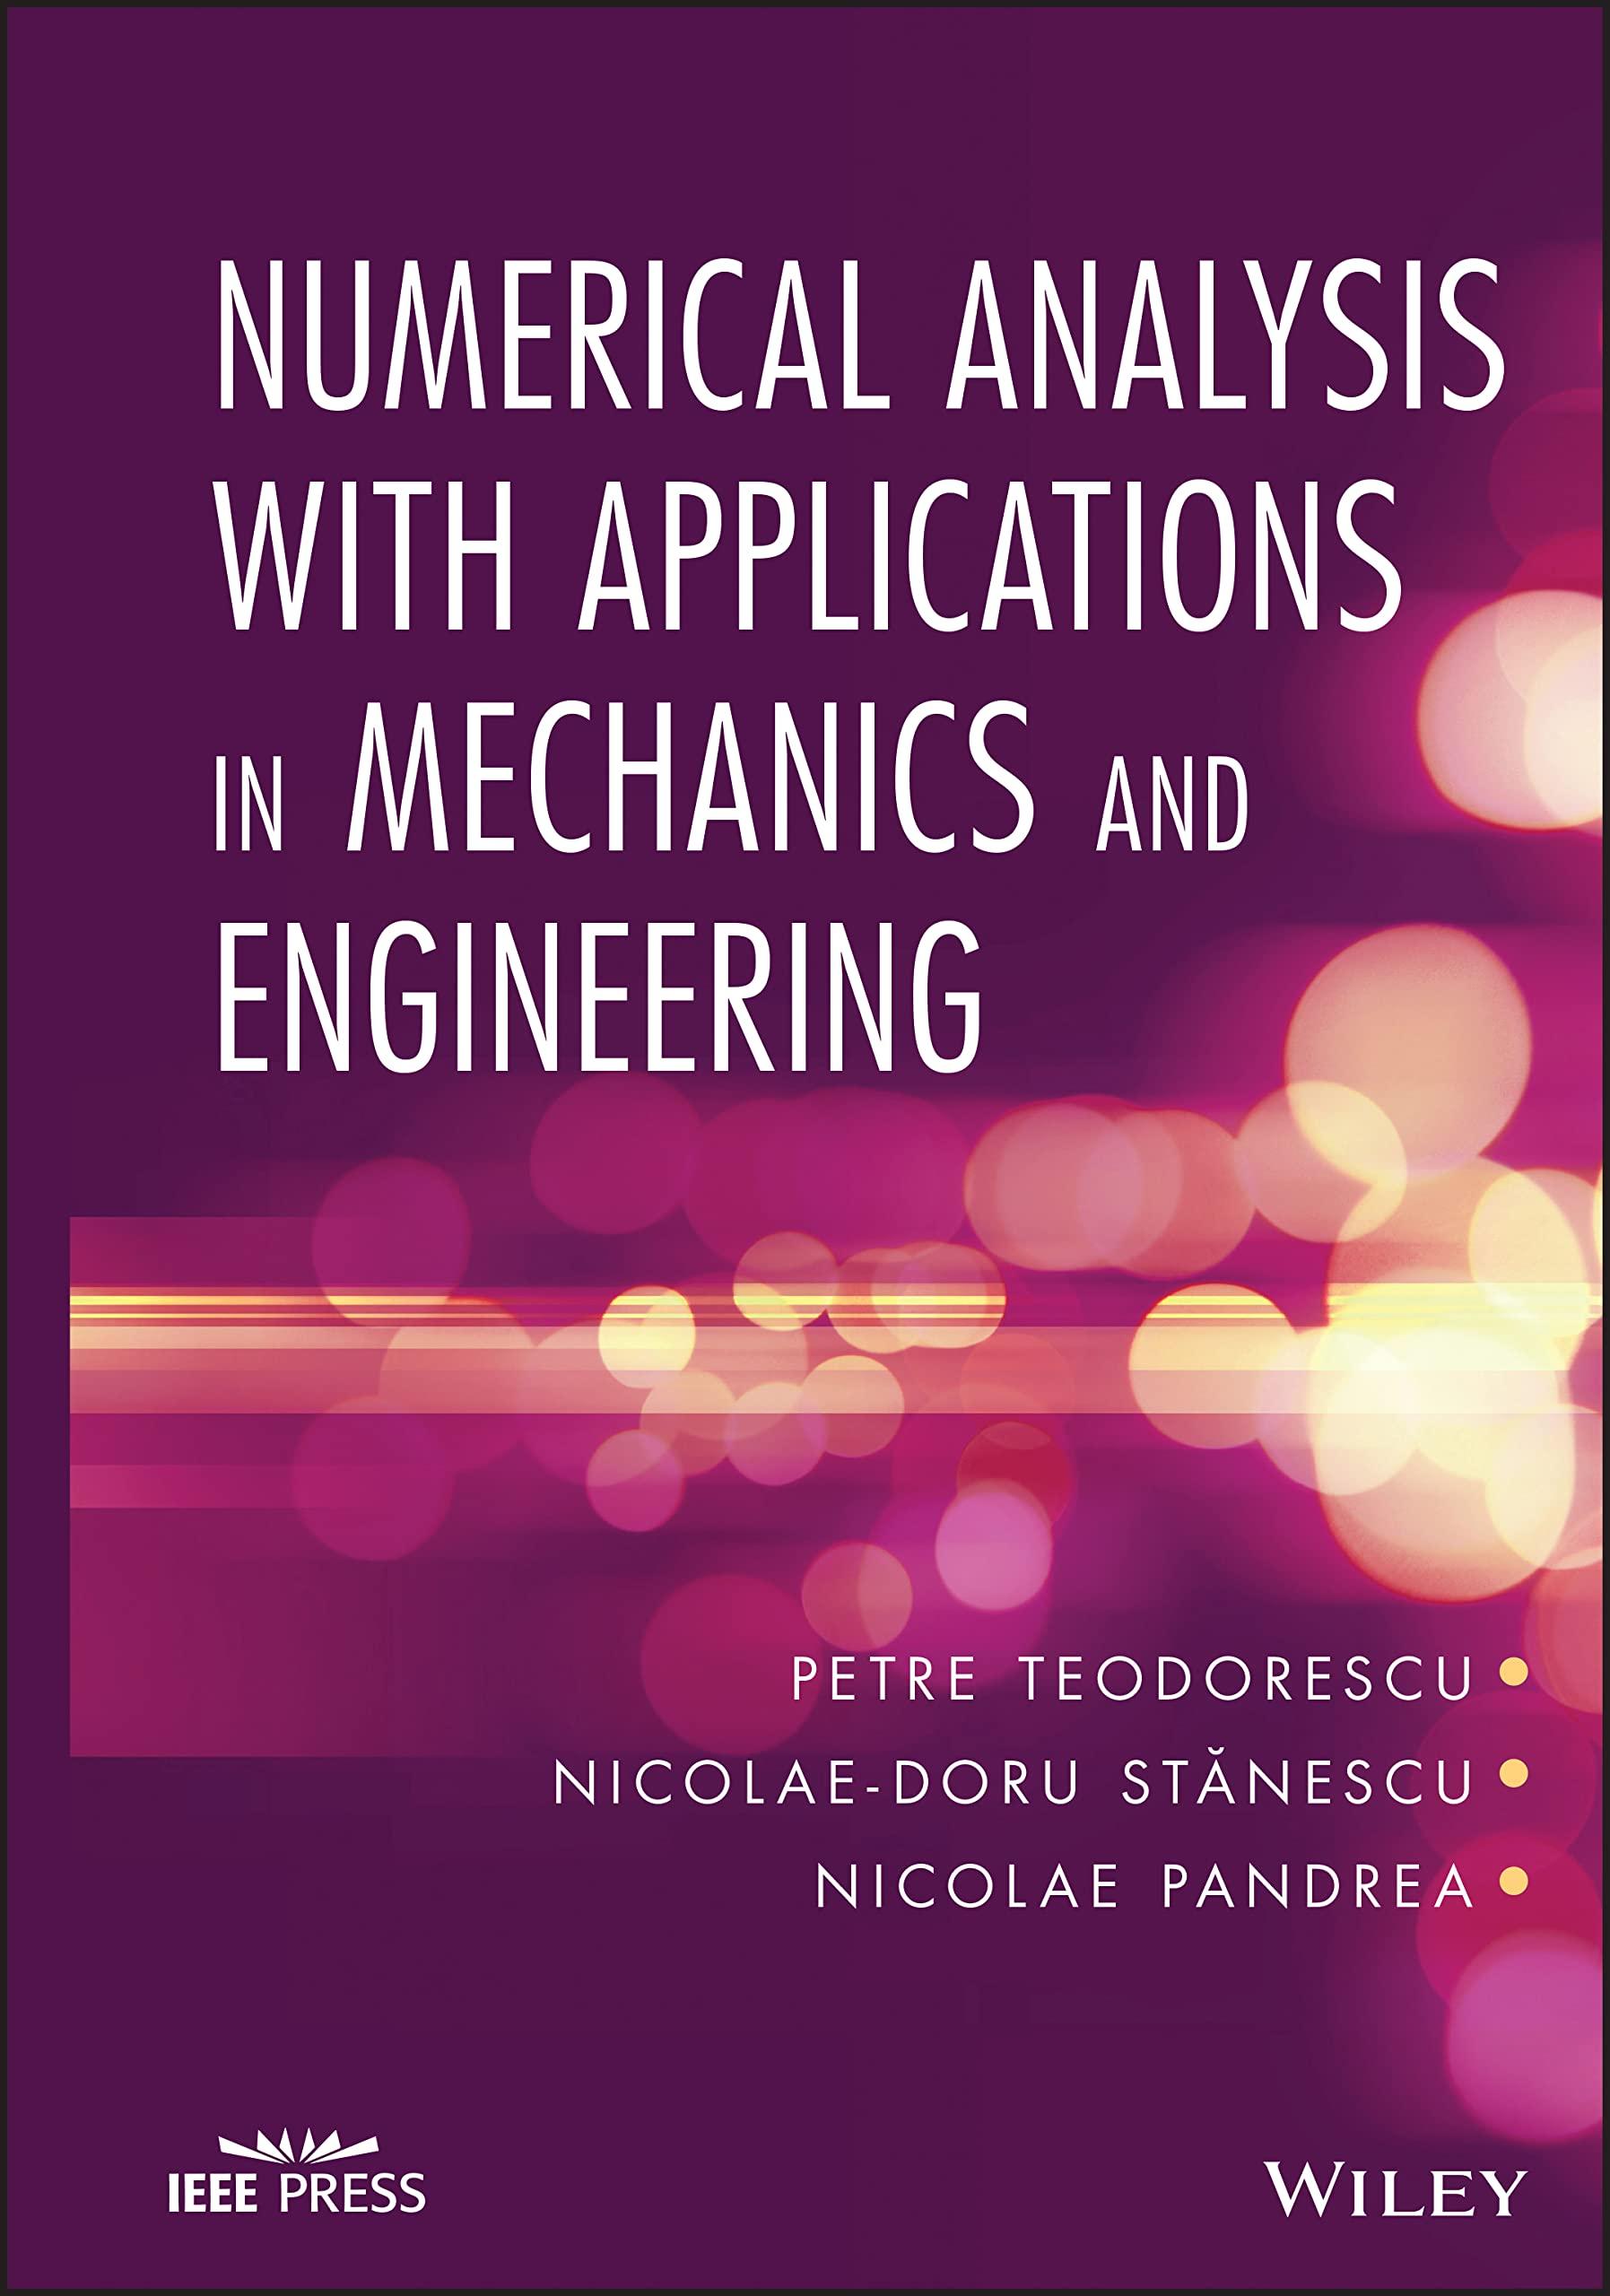 numerical analysis with applications in mechanics and engineering 1st edition petre teodorescu, nicolae-doru